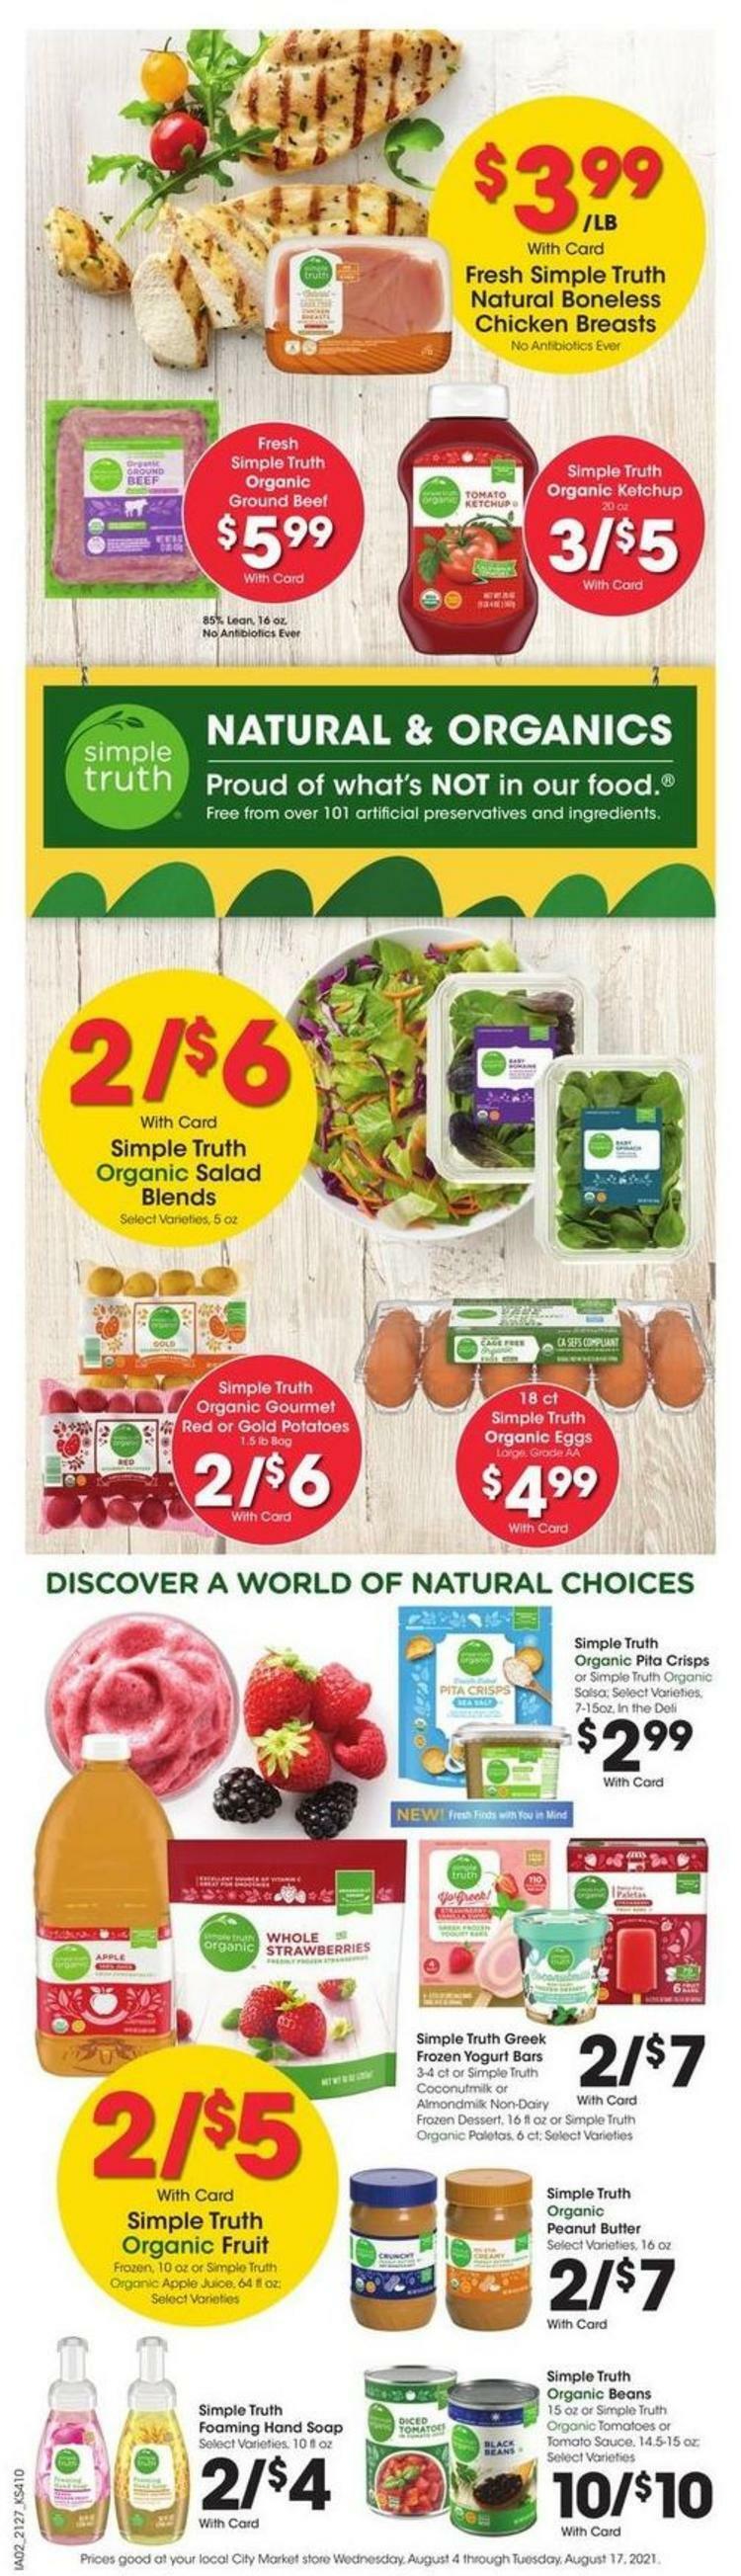 City Market Weekly Ad from August 4